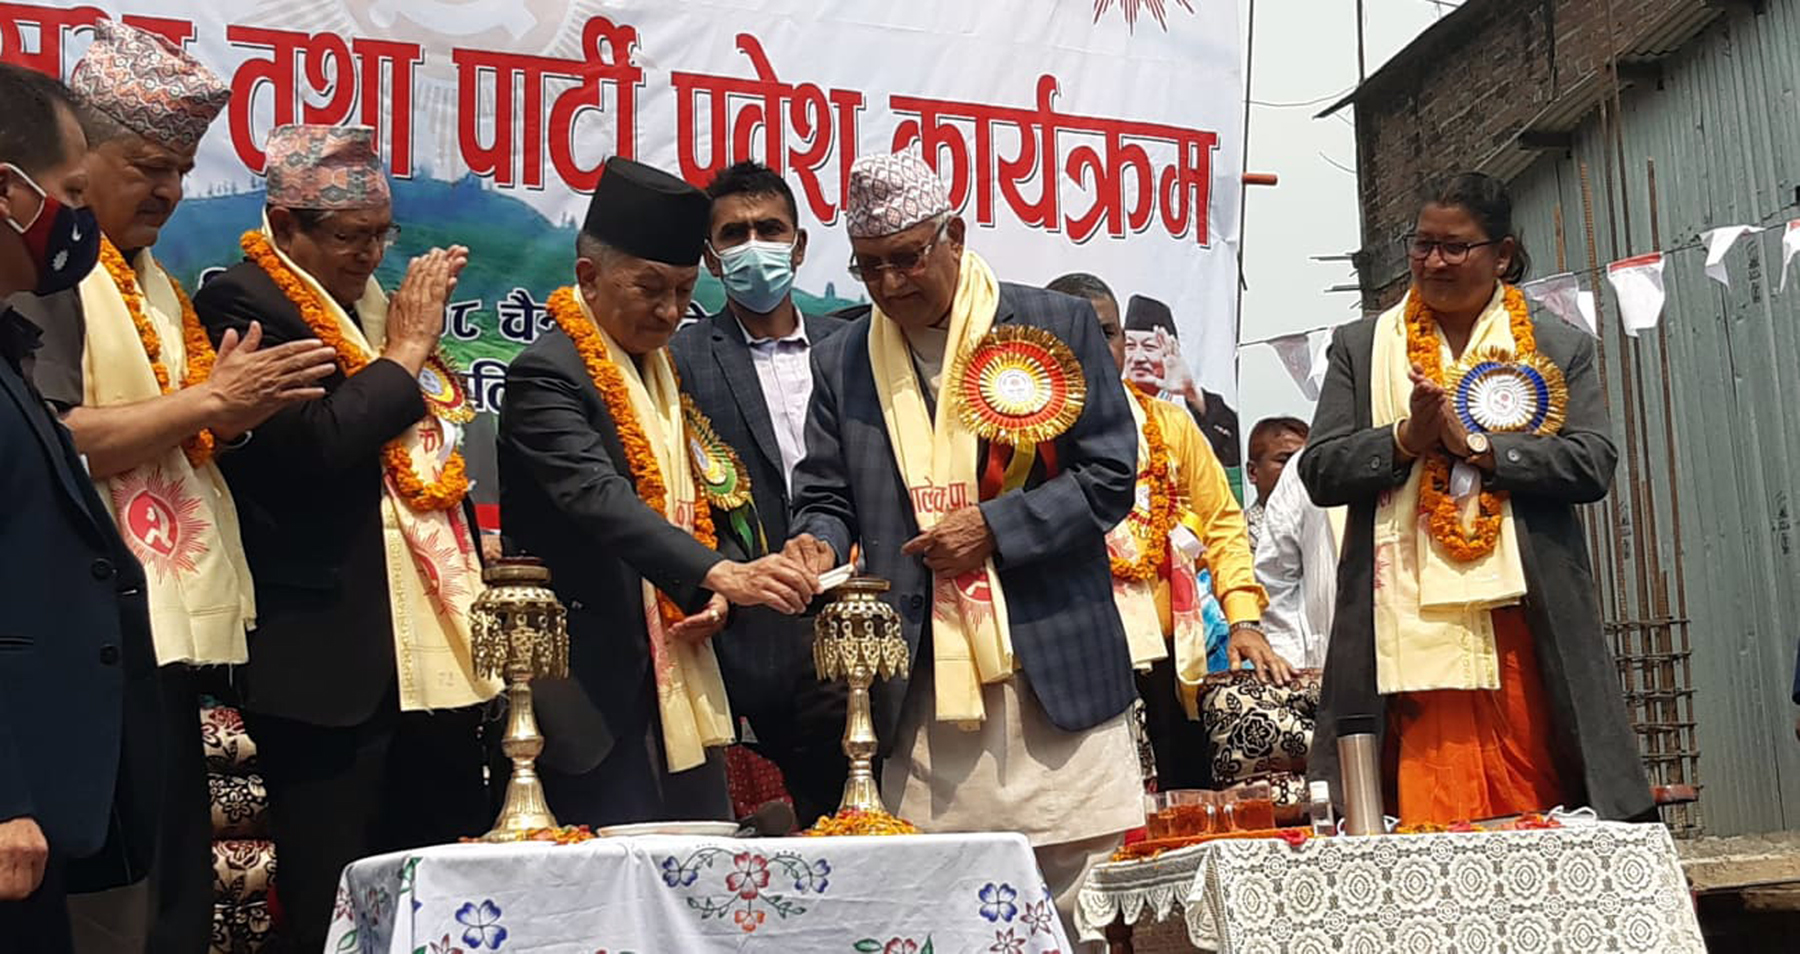 UML Chair Oli slams EC for giving two days to register candidates in local level election